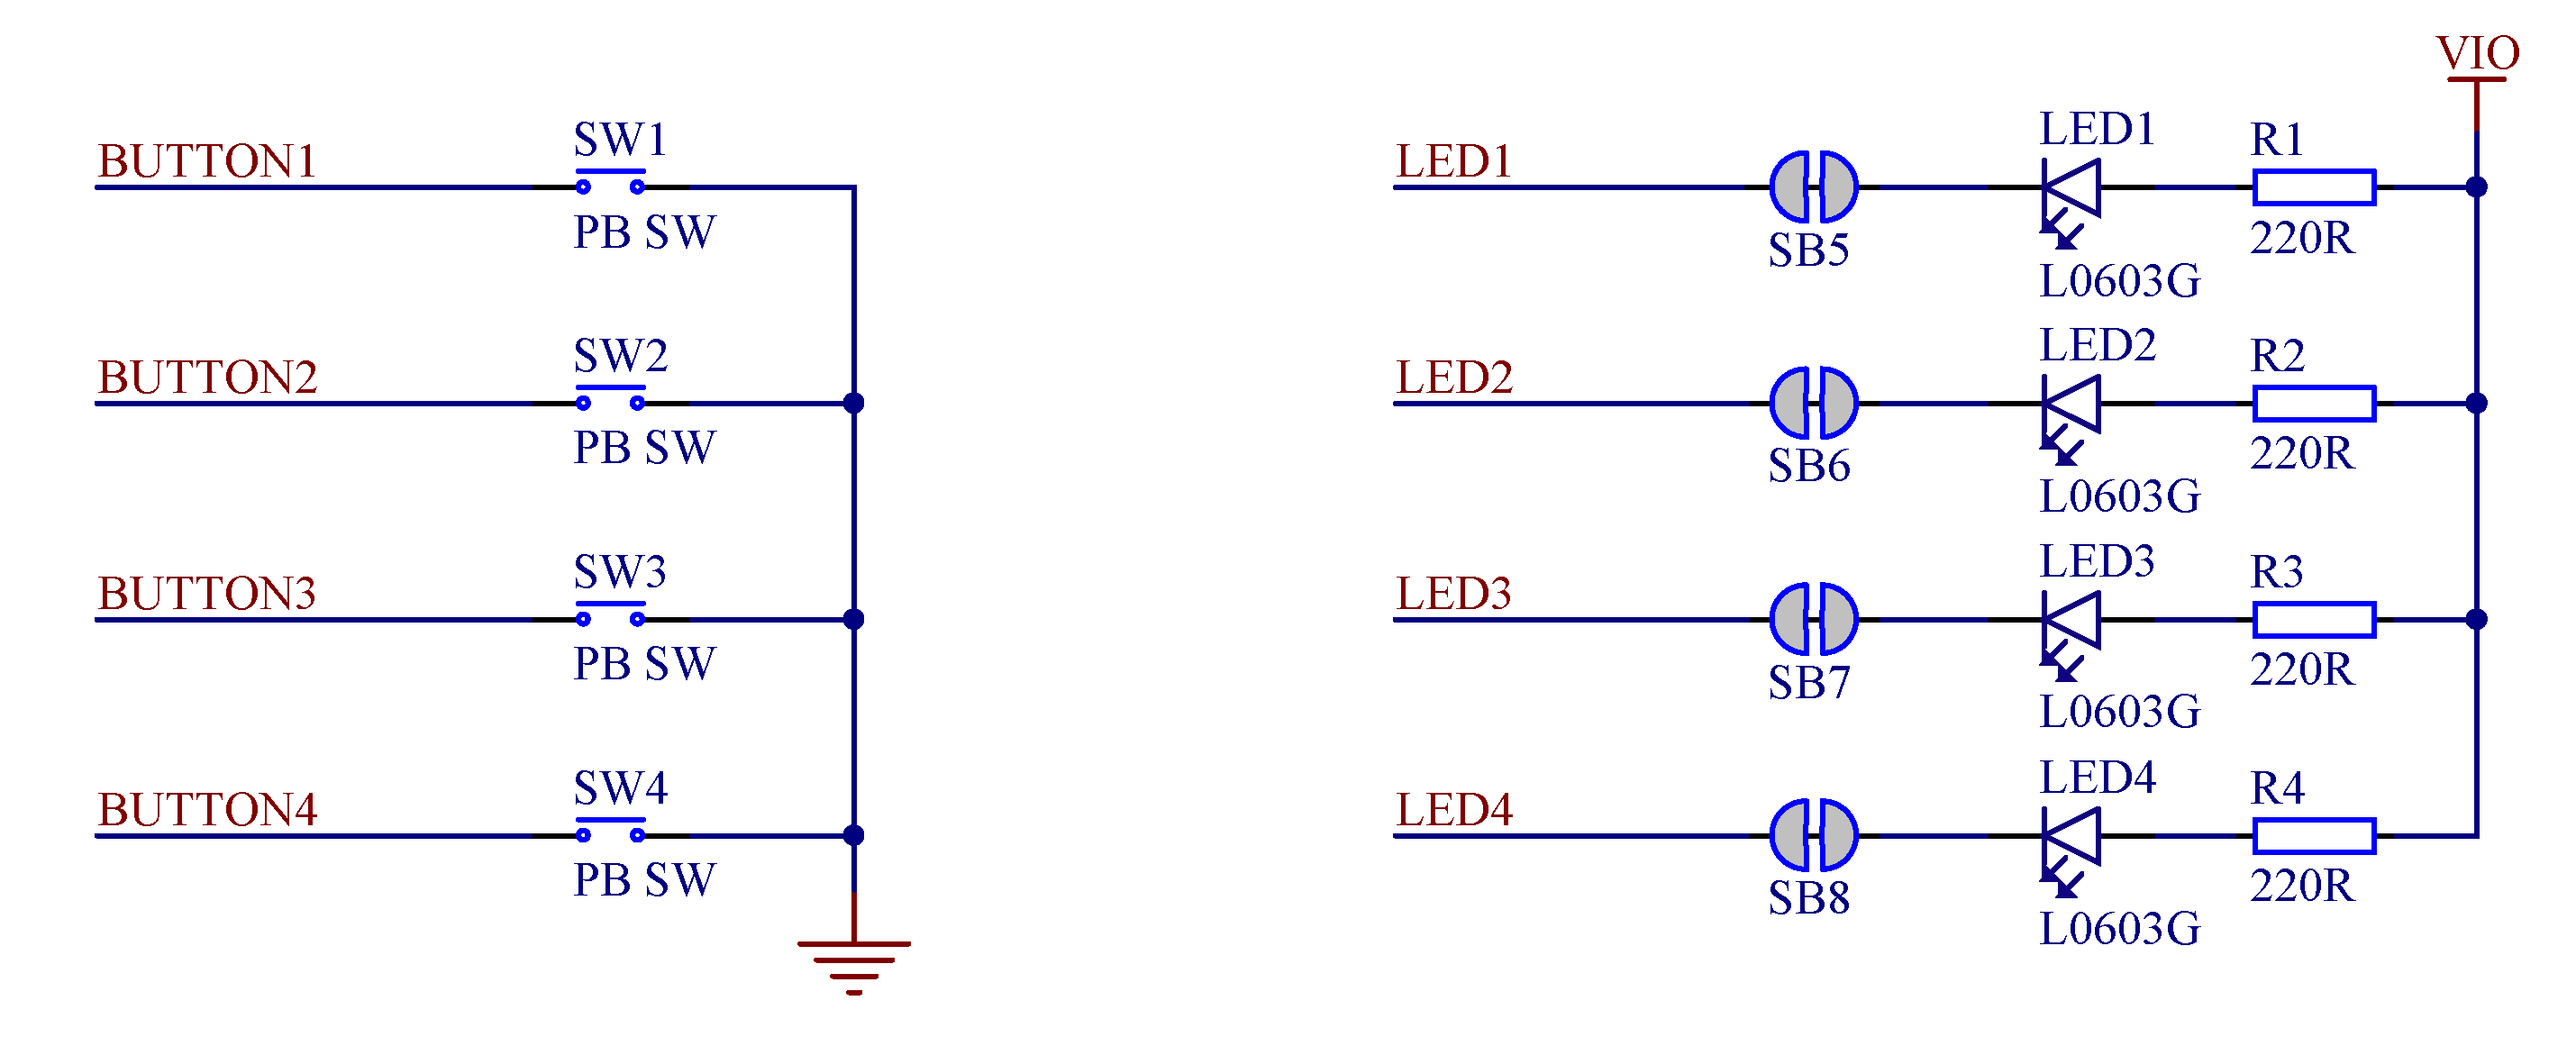 nRF52 PDK button and LED configuration